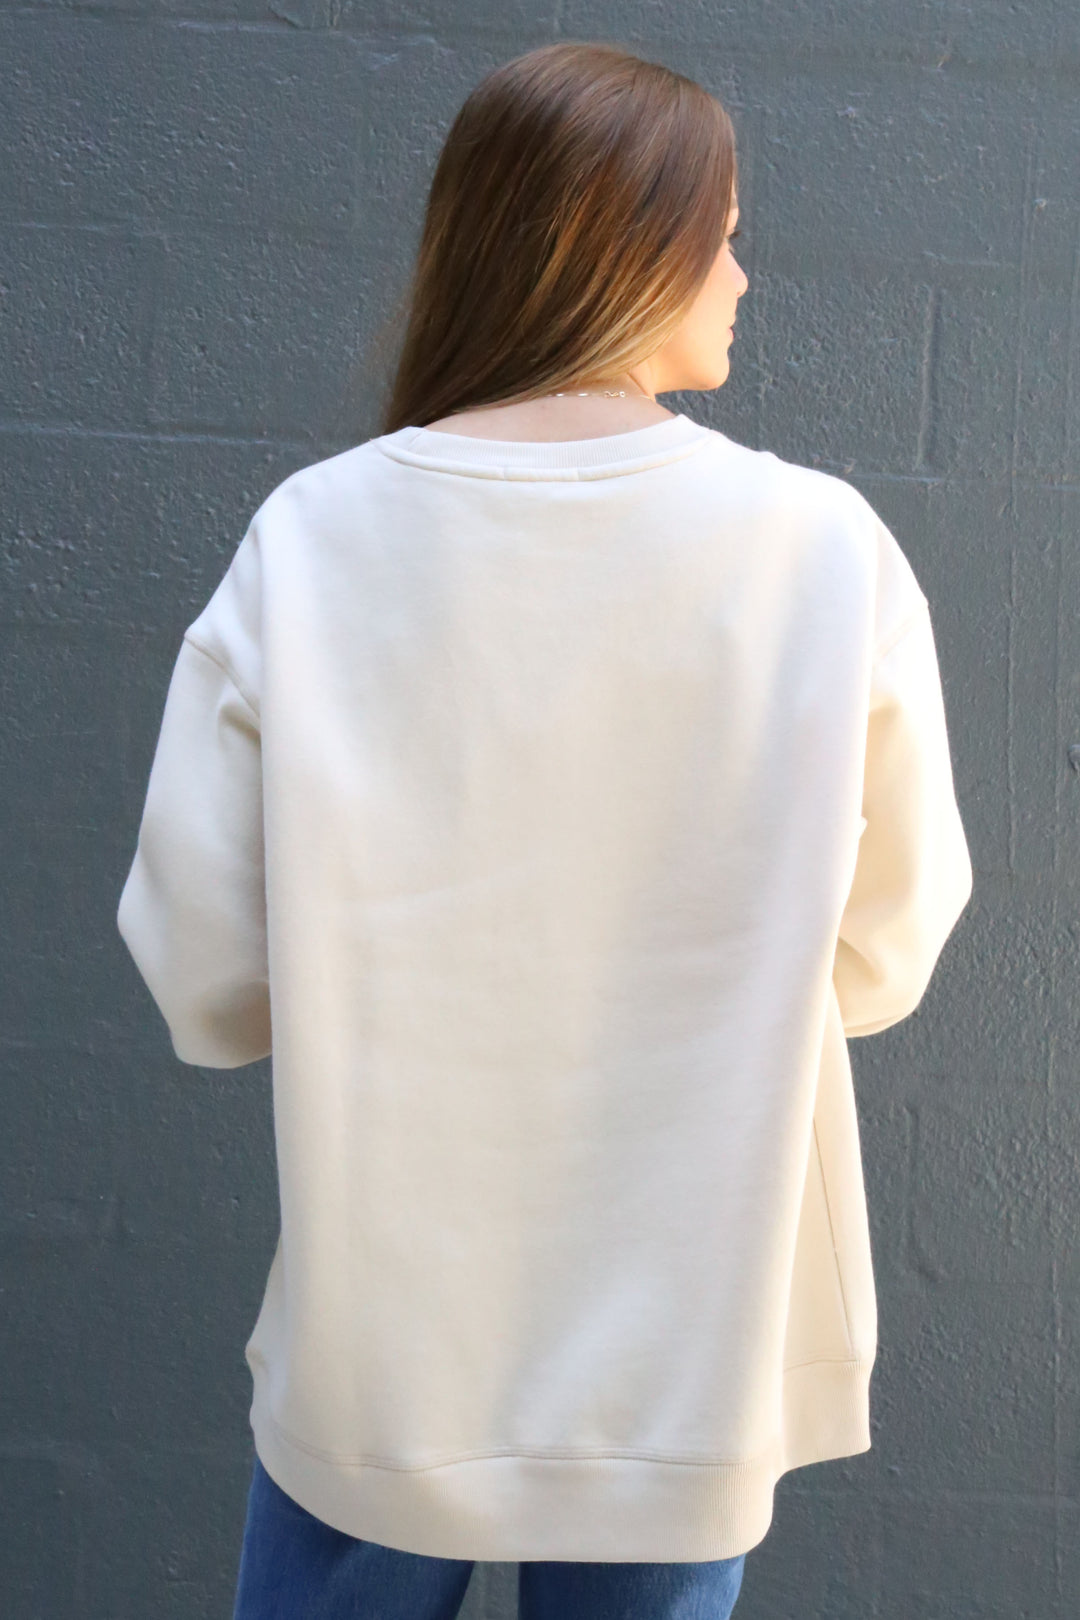 The back view of emma creneck in tapioca 